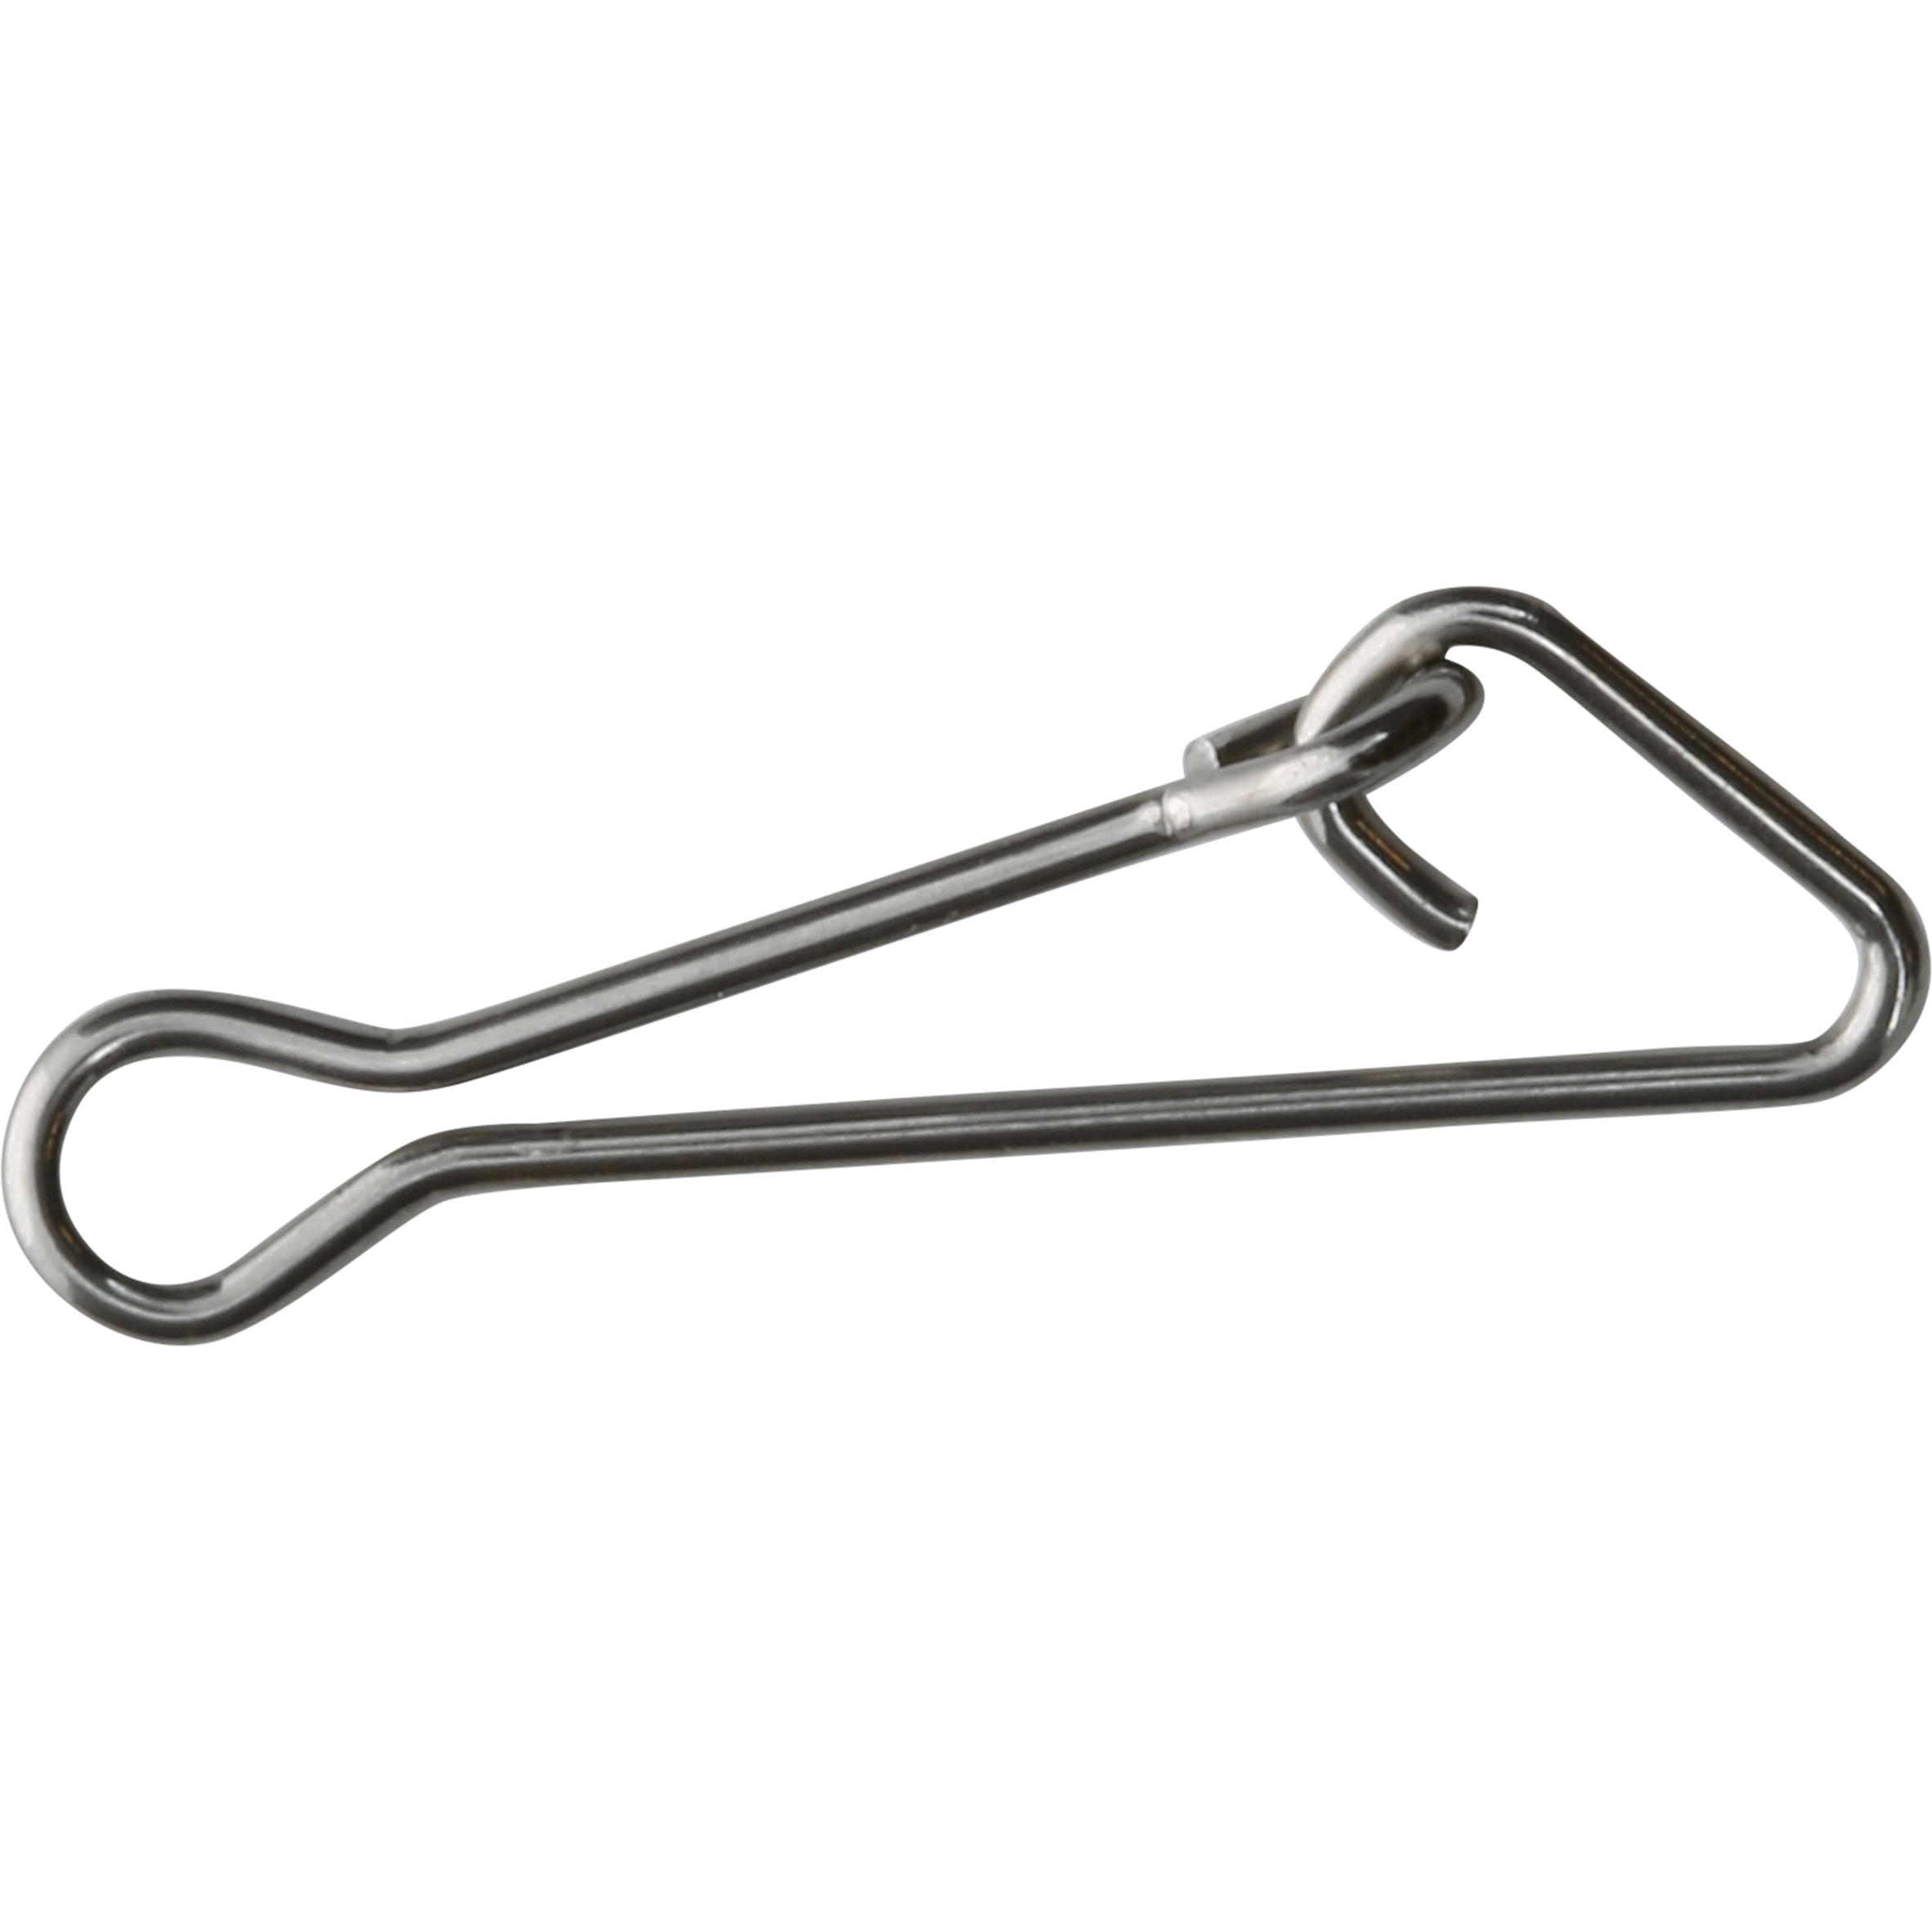 STAINLESS STEEL QUICK SNAP FISHING CLIP X10 3/6